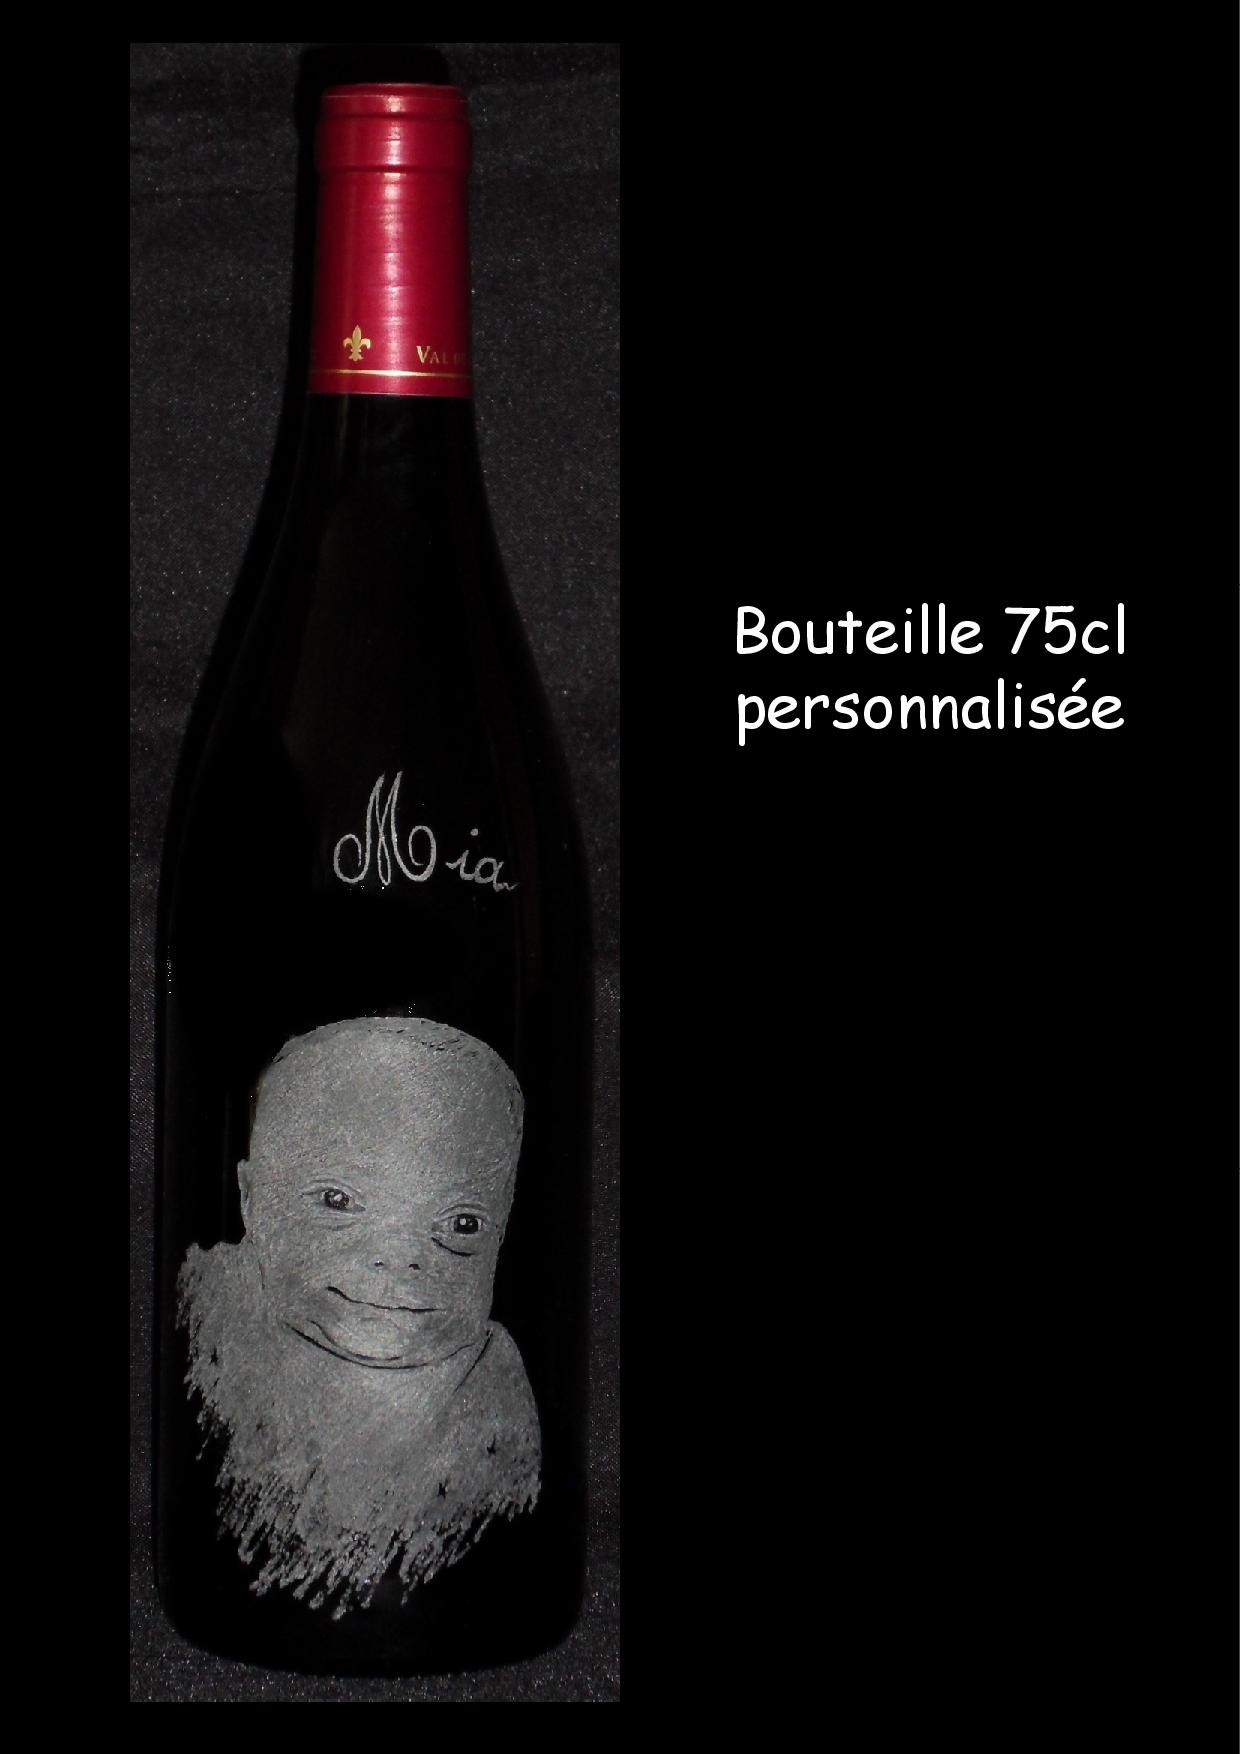 Bouteille 75cl personnalisee mia